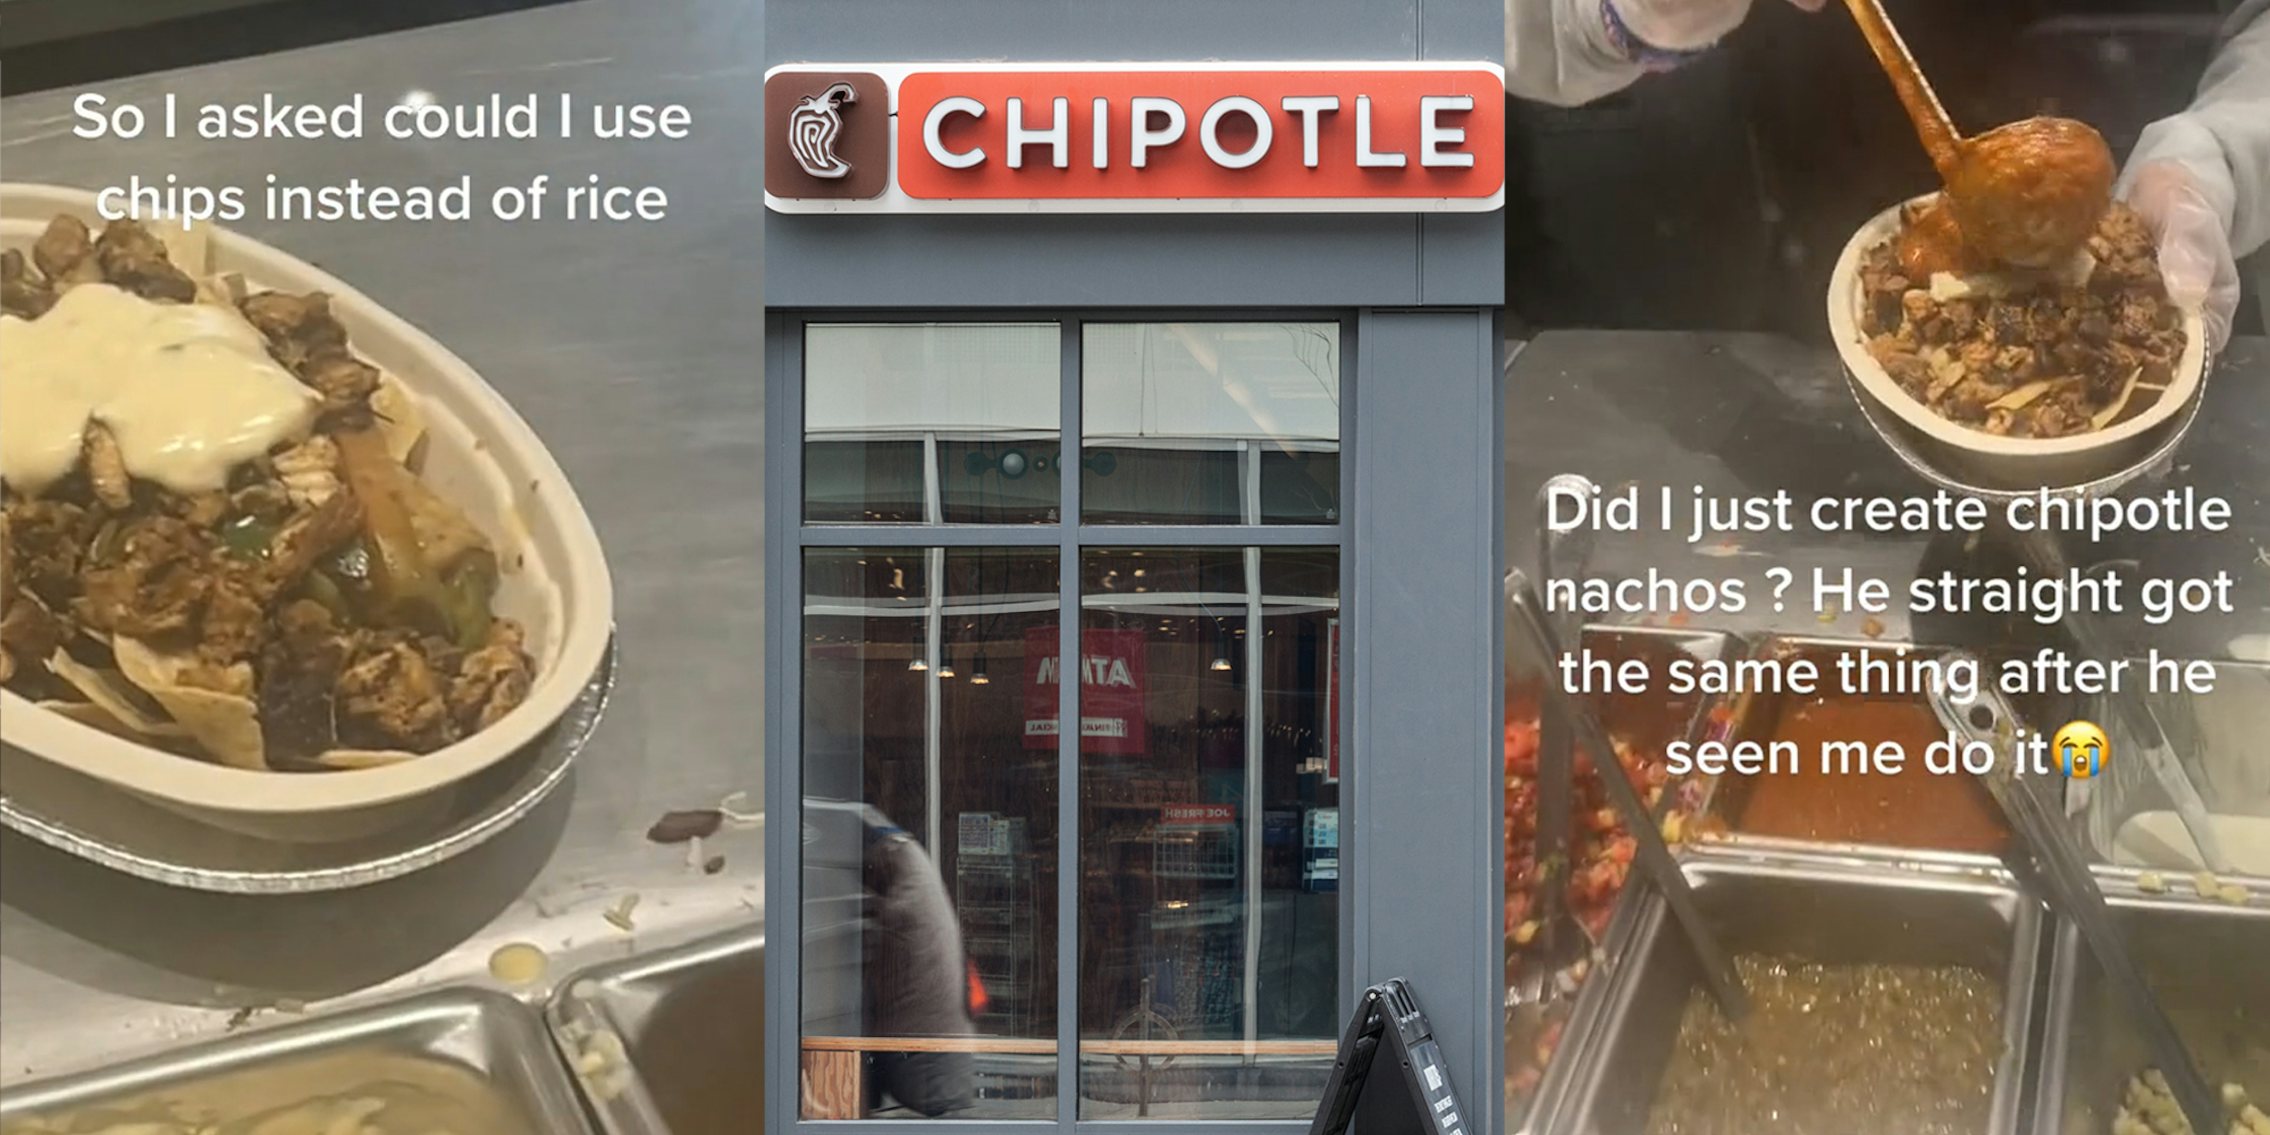 Chipotle bowl with chips instead of rice on counter with caption 'So I asked could I use chips instead of rice' (l) Chipotle sign on building (c) Chipotle employee putting sauce on bowl of food with caption 'Did I just create chipotle nachos? He straight got the same thing after he seen me do it' (r)